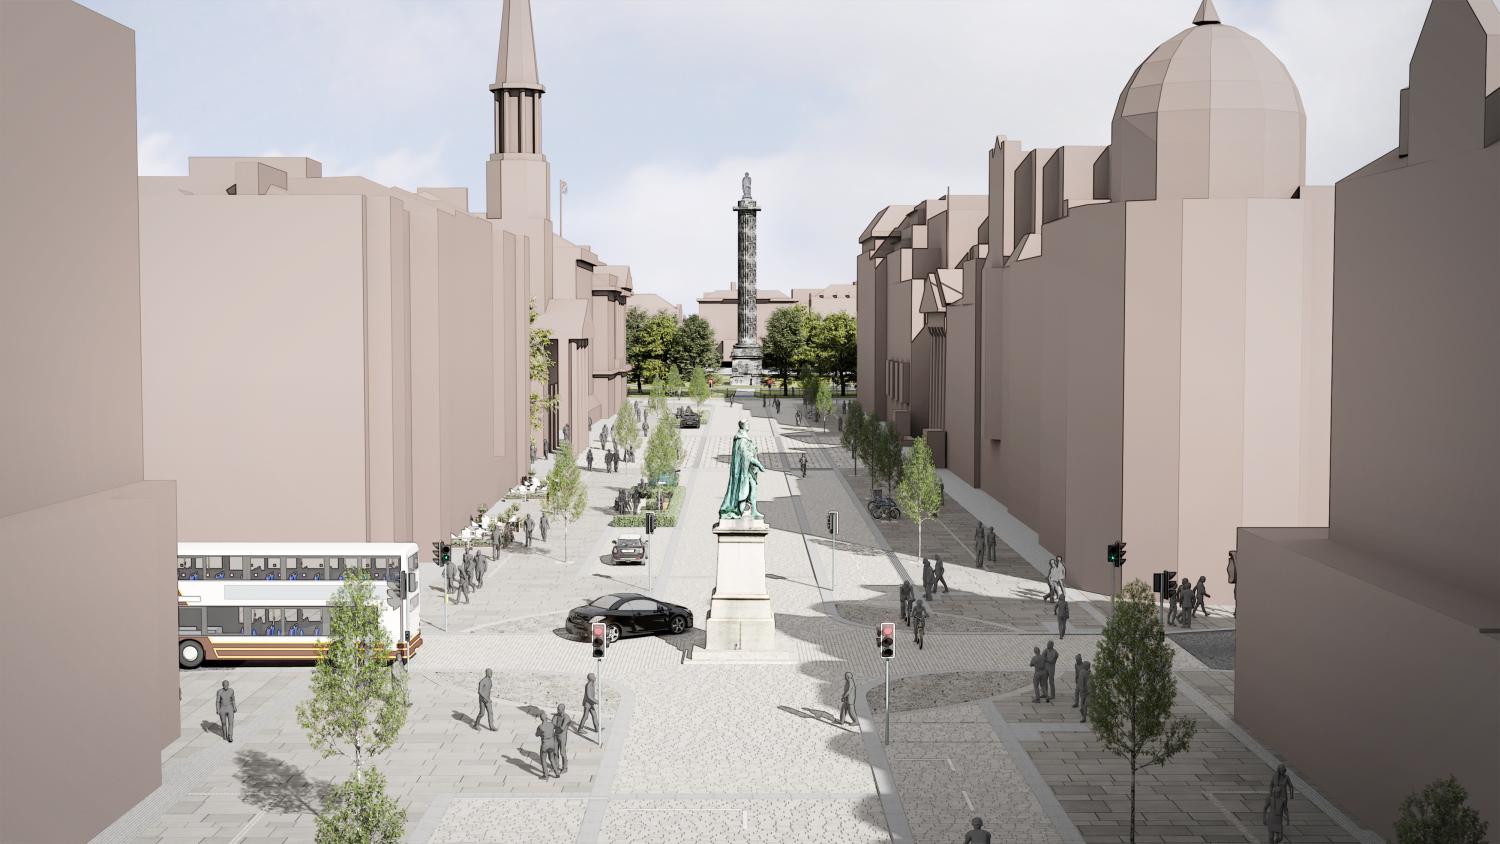 George Street redesign project gets £20m funding boost